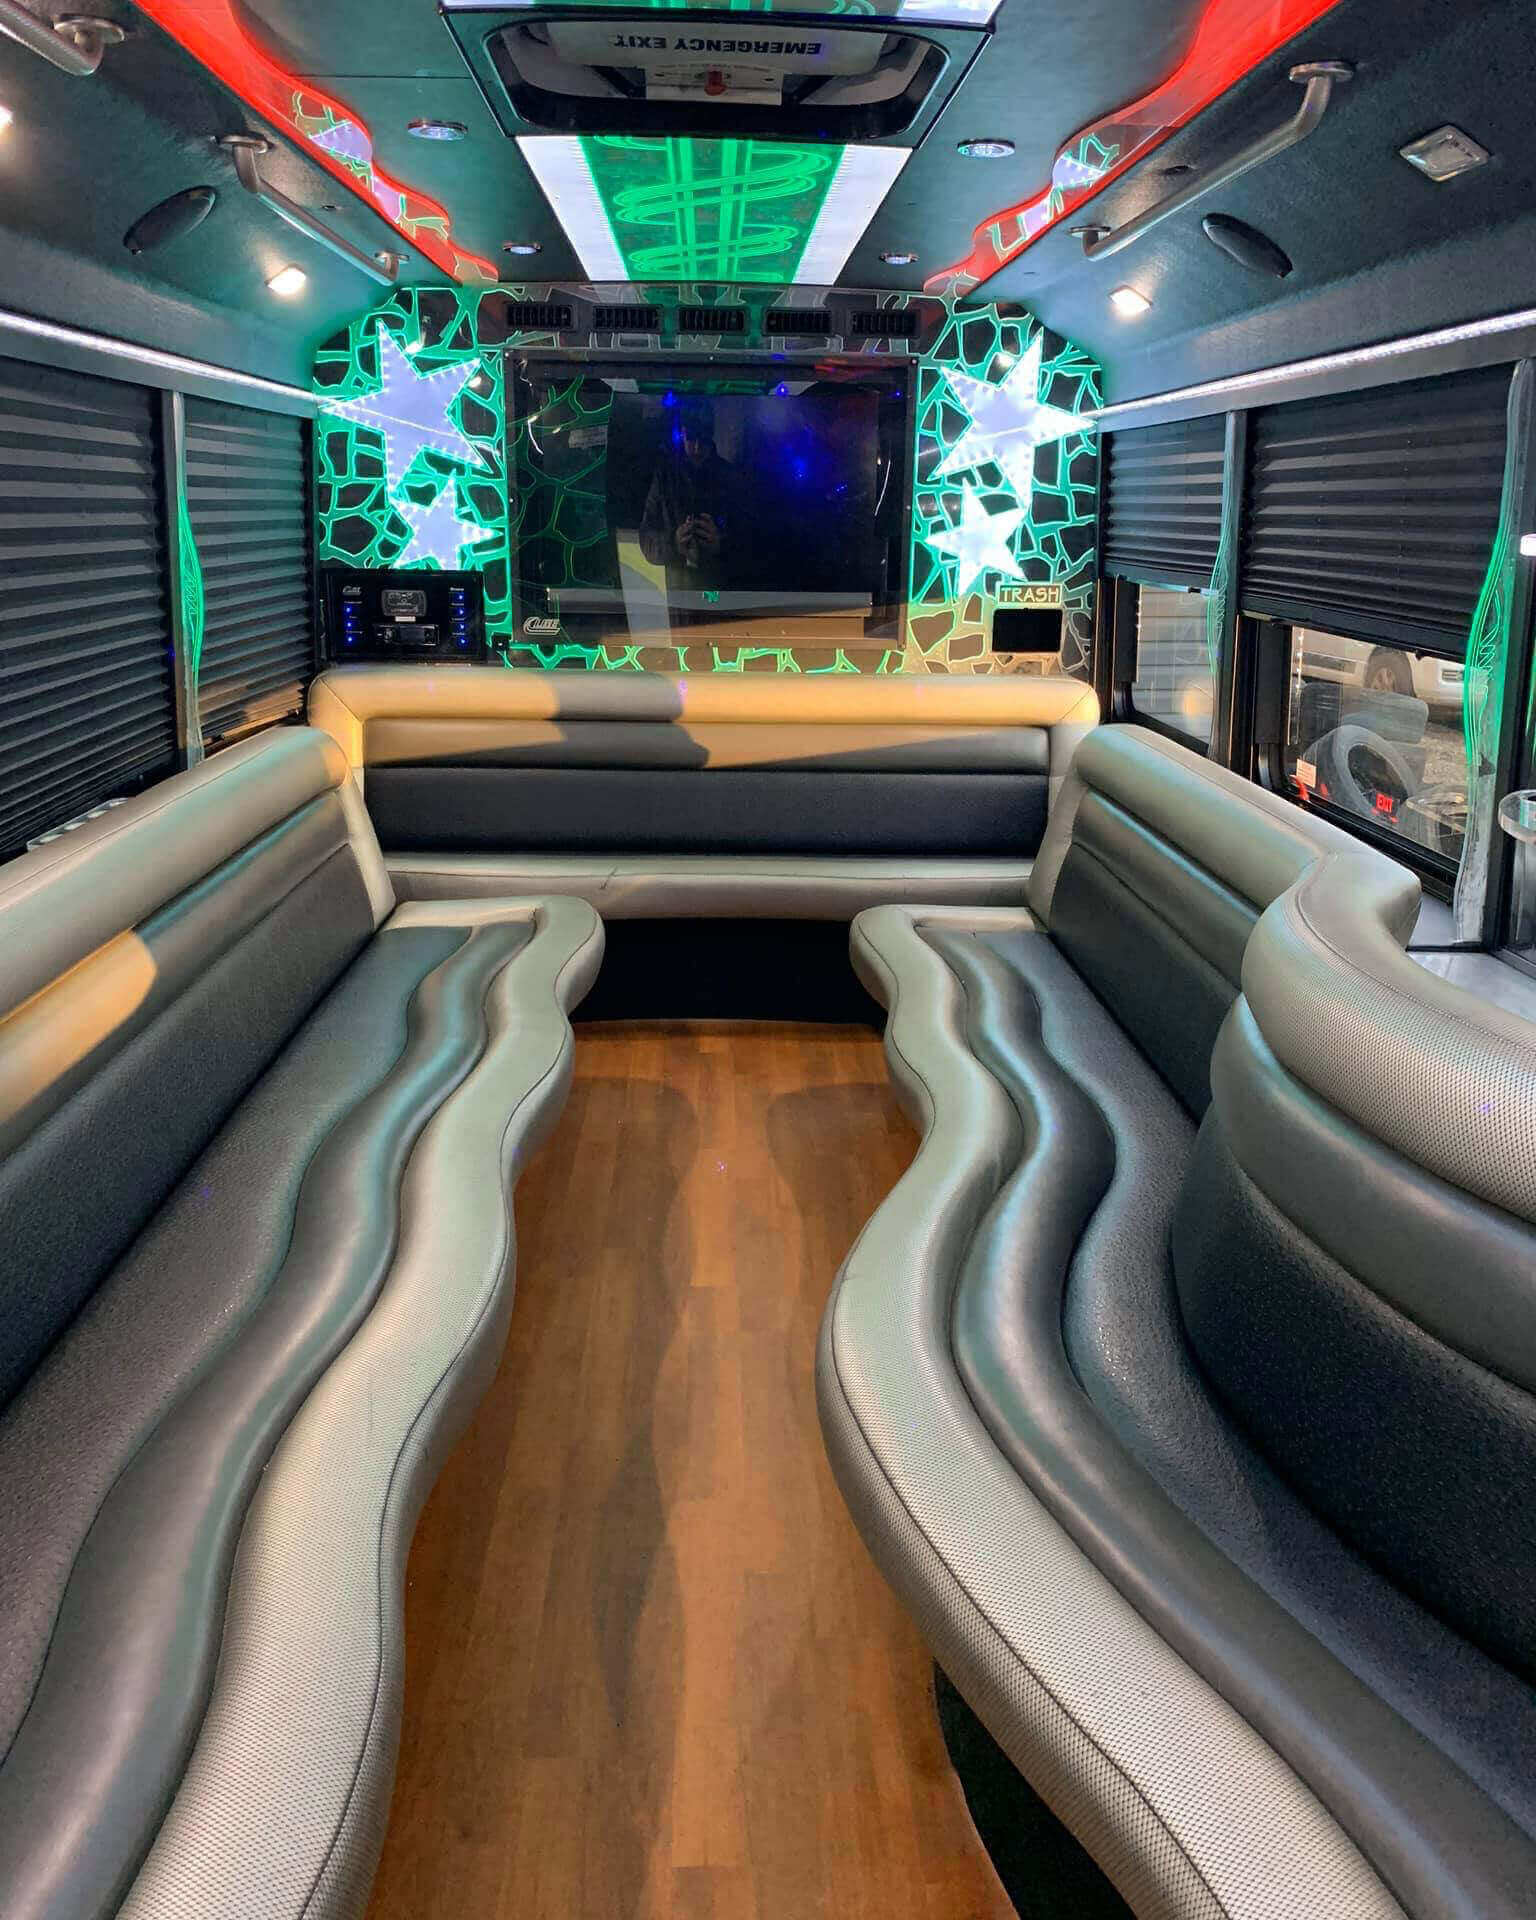 Party bus interior with leahter seats